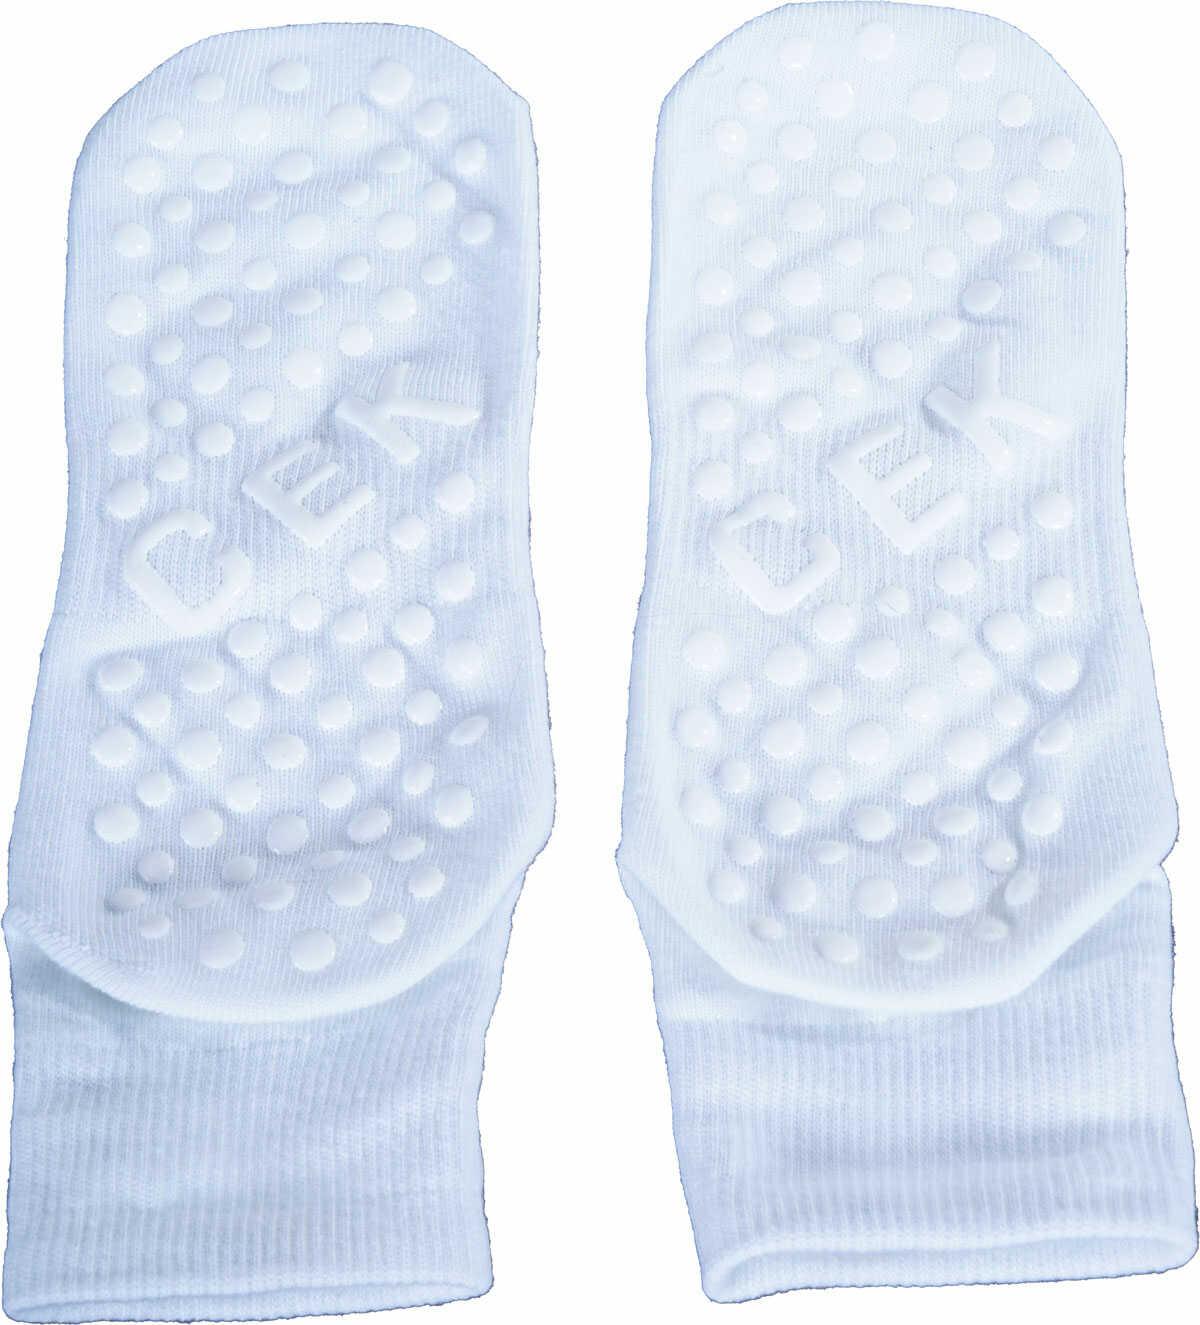 Chaussettes antidérapantes 3 paires blanches